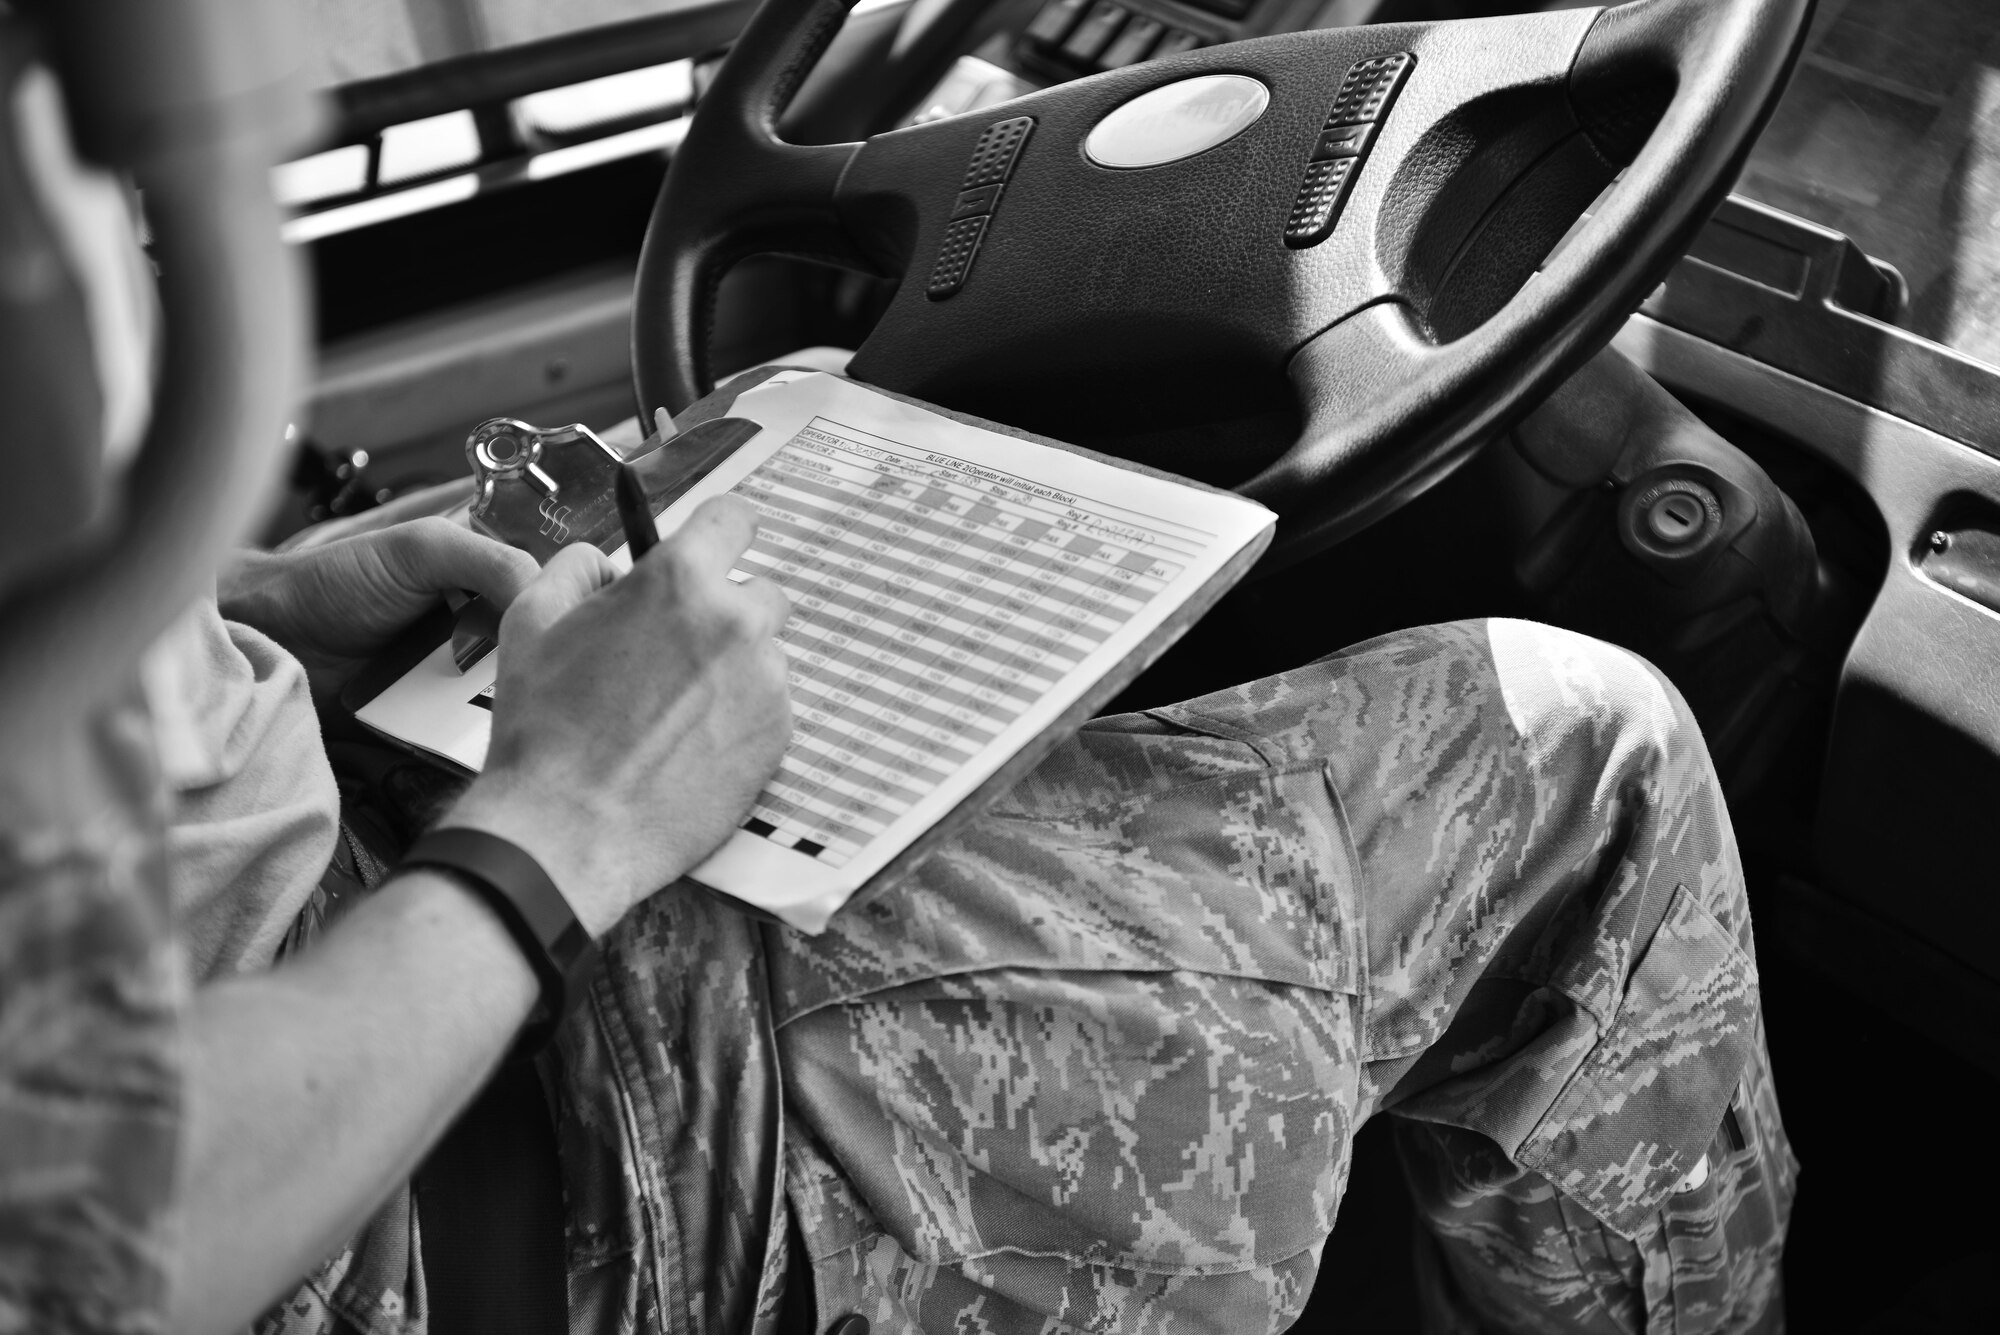 Senior Airman Daniel Wensel, 379th Expeditionary Logistics Readiness Squadron, annotates his arrival time to every stop during his shift operating a base shuttle for deployed members June 30, 2015 at Al Udeid Air Base, Qatar. The airmen from the 379th ELRS provide public transportation to over 2,500 deployed members from all services and branches on a daily basis to alleviate traffic and provide transportation to living quarters, dining facilities and various work areas.  (U.S. Air Force photo/ Staff Sgt. Alexandre Montes)